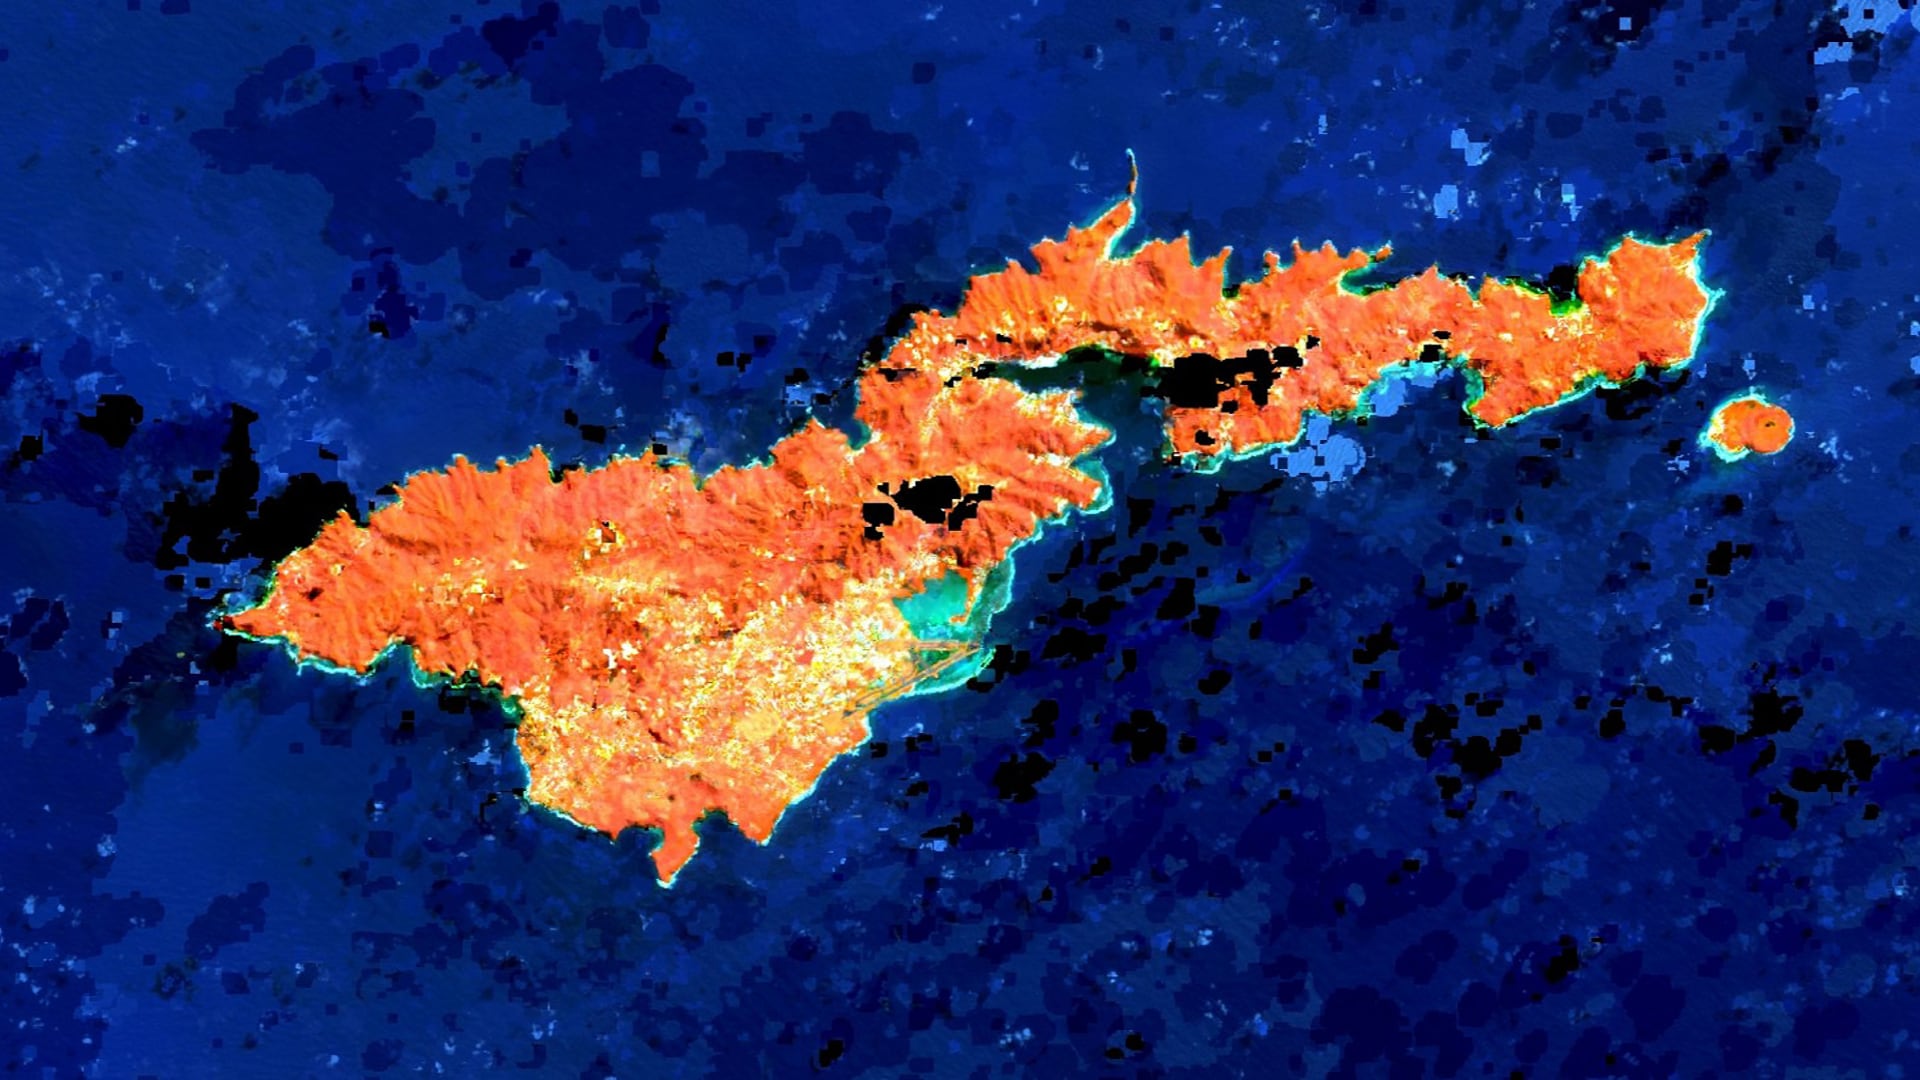 This is a composite of five 2018 Landsat 8 OLI/TIRS images taken over Tutuila, American Samoa, mosaicked in Google Earth Engine to minimize visible cloud cover. A land-water band combination (5,3,1) is applied to emphasize coastal boundaries in turquoise, vegetation in orange, development in yellow-white, and persistent clouds in black. Annual composites optimize portrayal of the rainy island’s visible land cover in a given year, giving local conservation managers a route to quantify change over time.